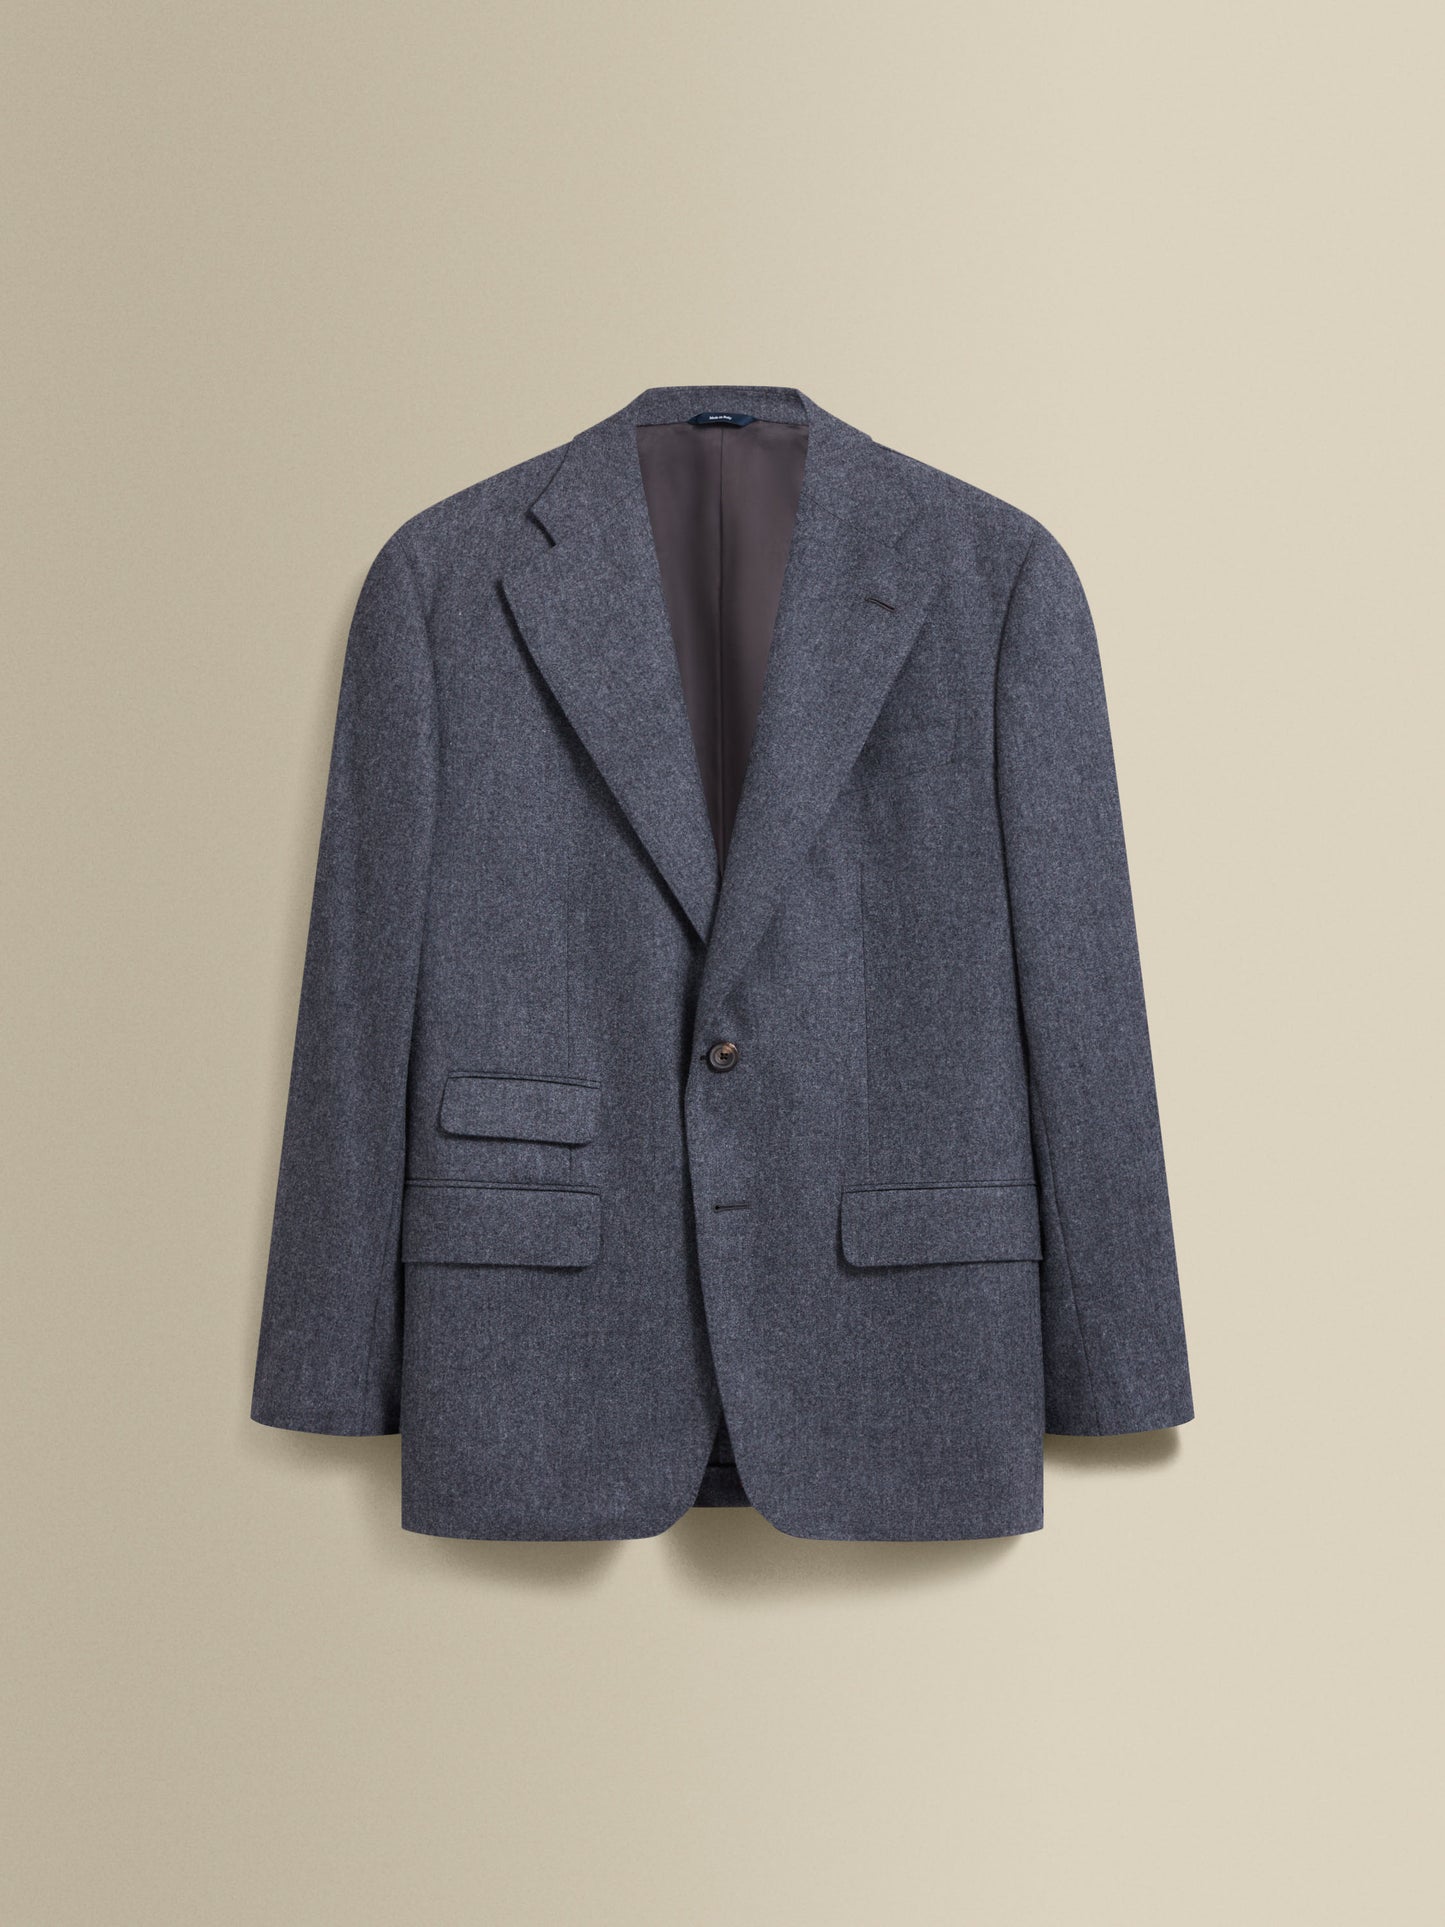 Flannel Single Breasted Wool Suit Grey Jacket Product Image